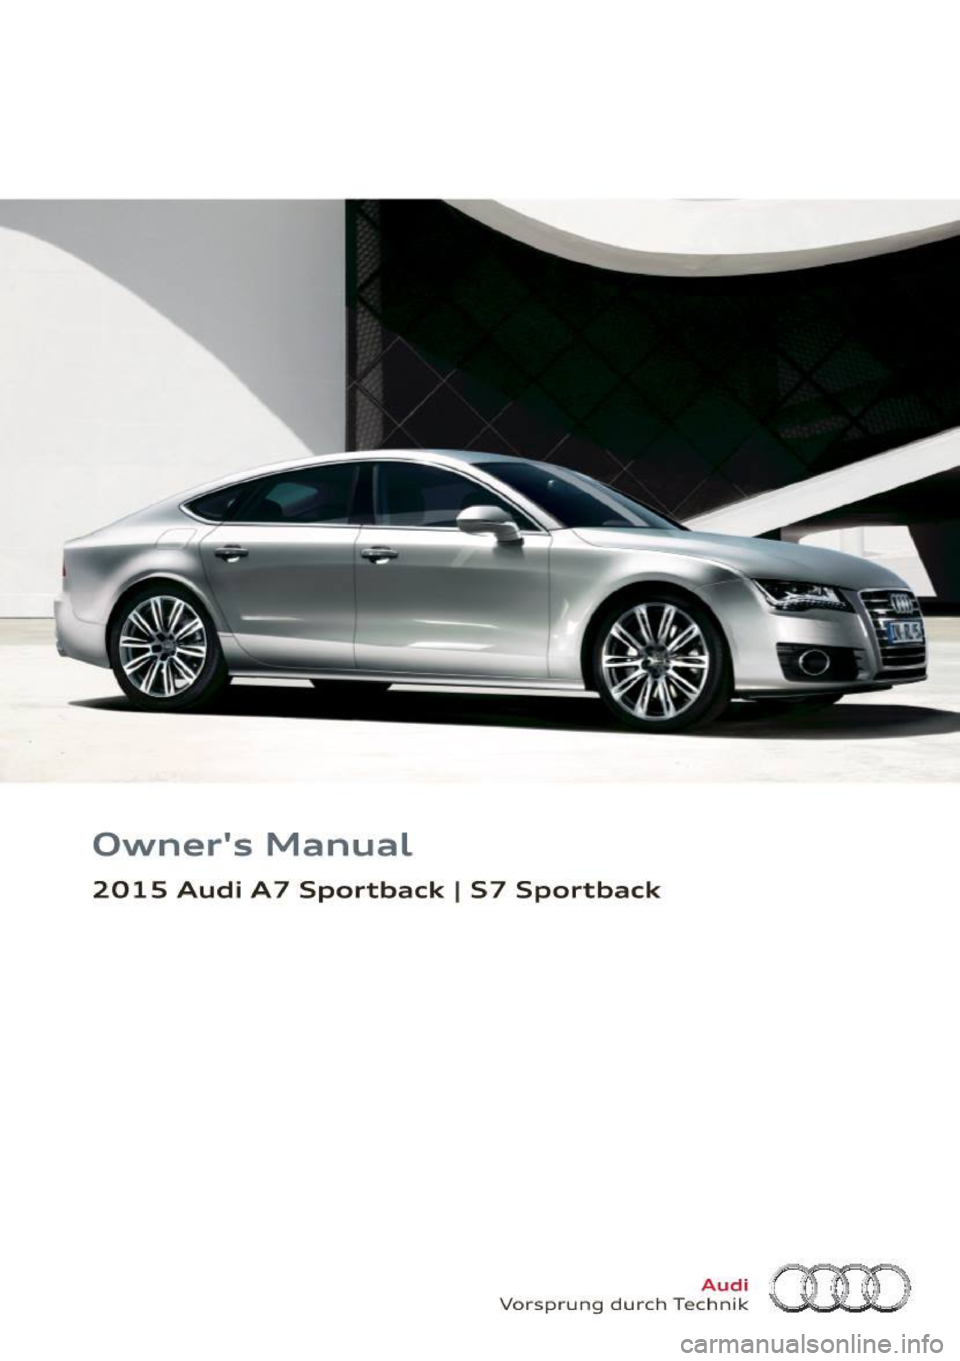 AUDI S7 2015  Owners Manual Owners  Manual 
2015  Audi  A7  Sportback I 57  Sportback 
Vorsprung durch Tee~~?~ ()[ID  